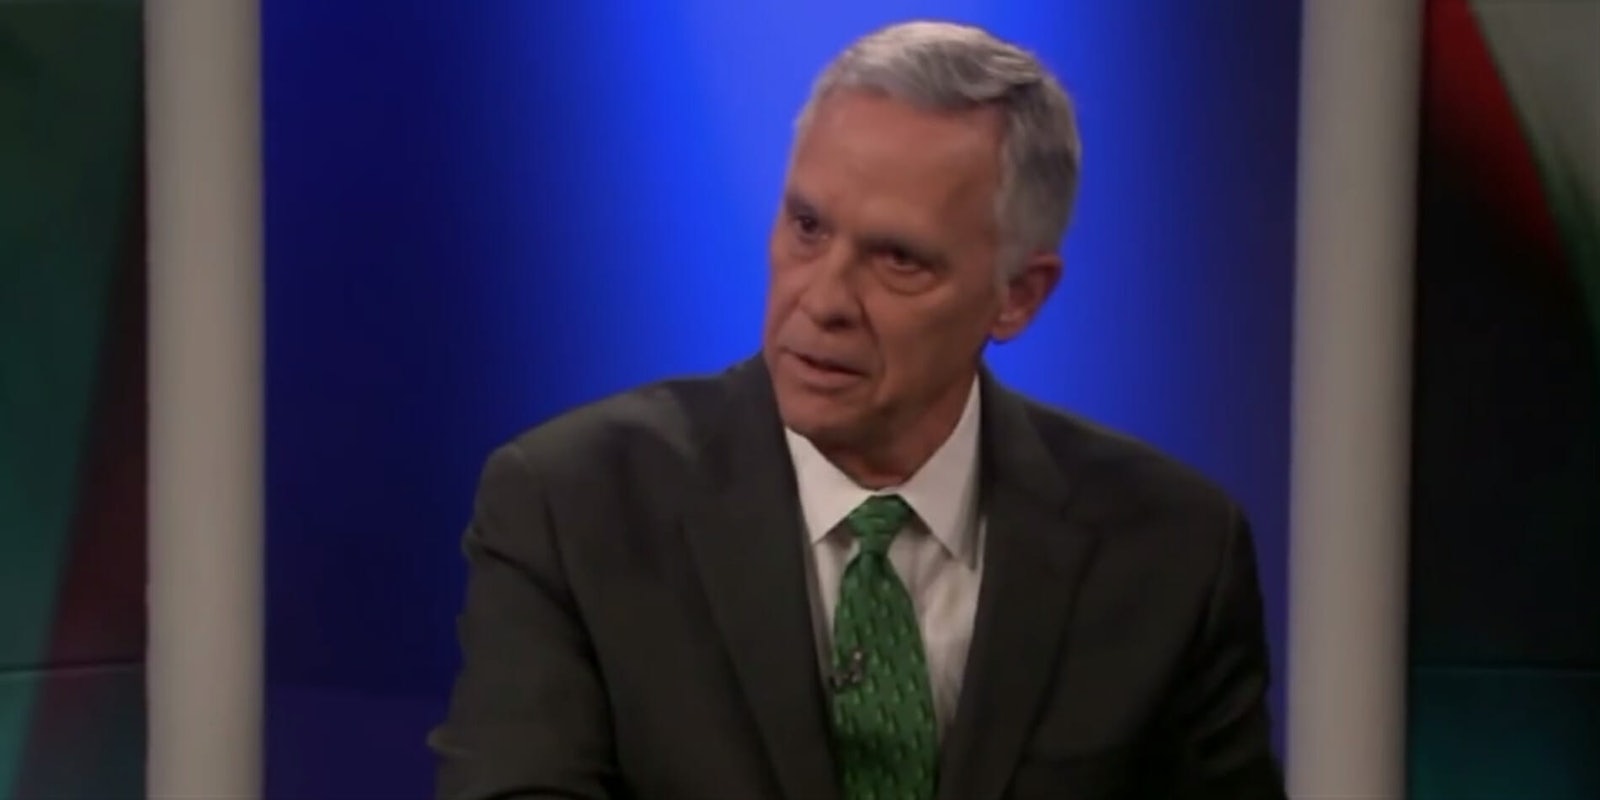 Kirk Humphreys compared gay Americans to pedophiles in a controversial talk show segment.